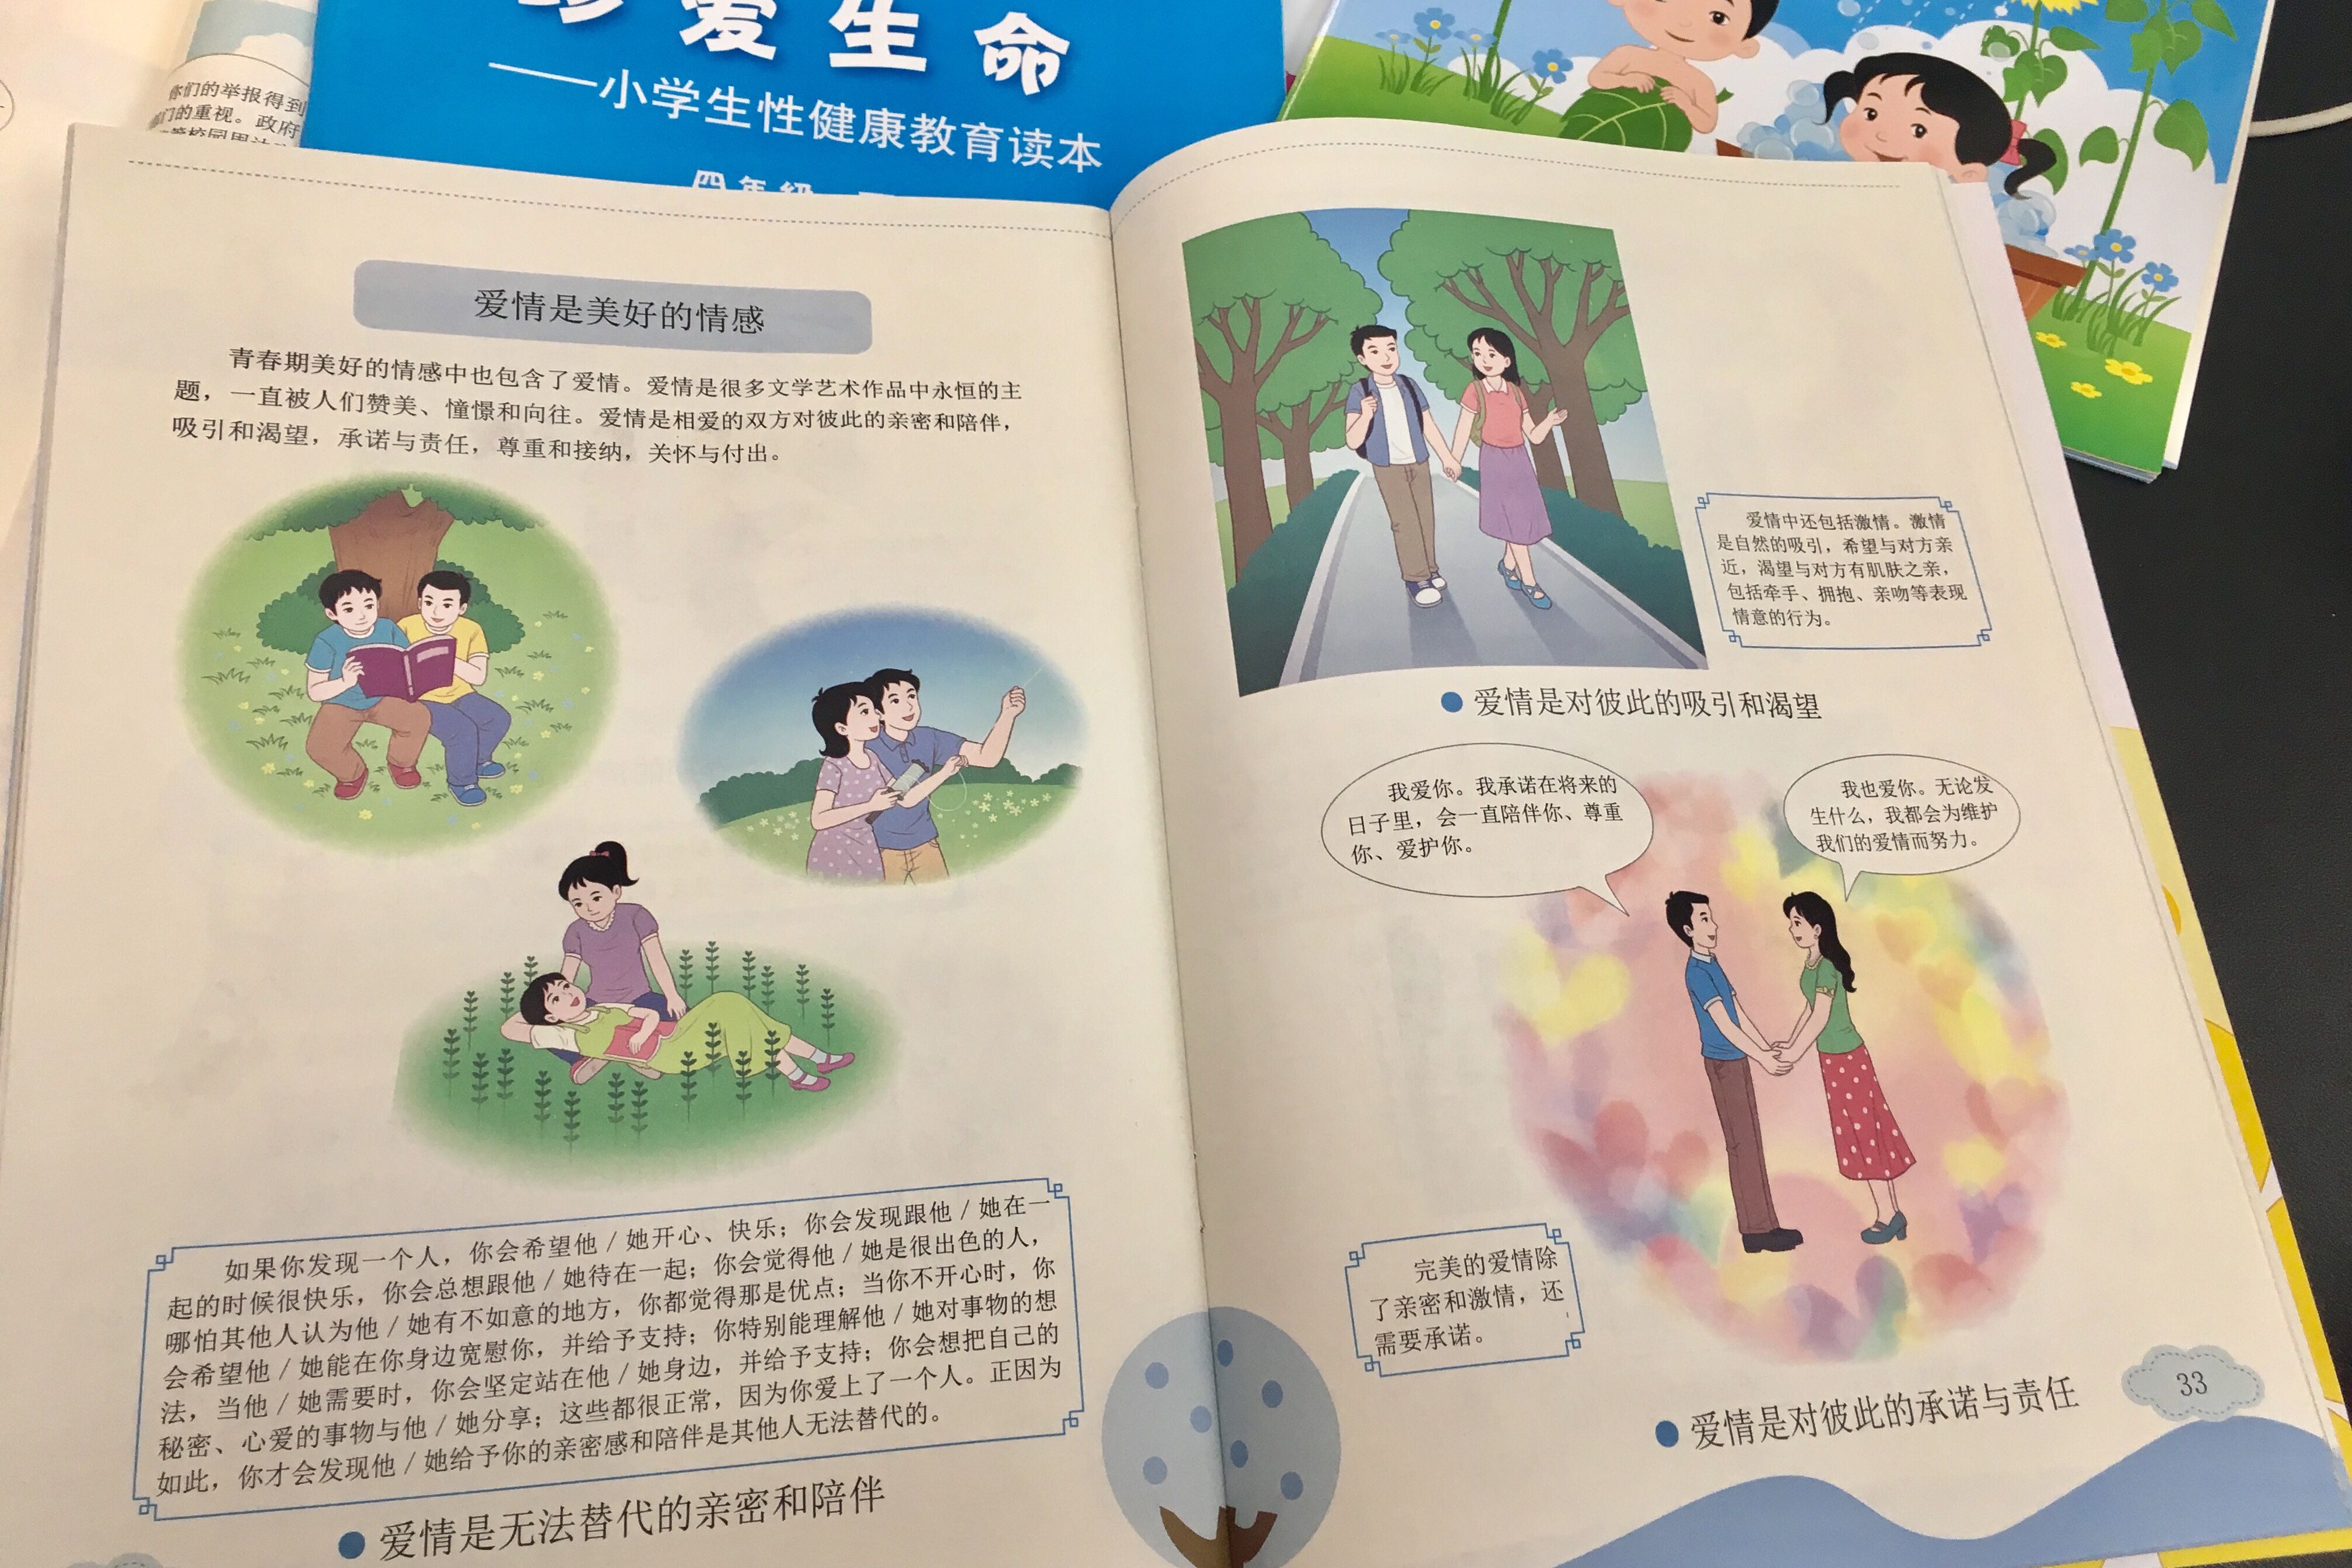 Primary School Sex Porn - Shock and praise for groundbreaking sex-ed textbook in China | CNN